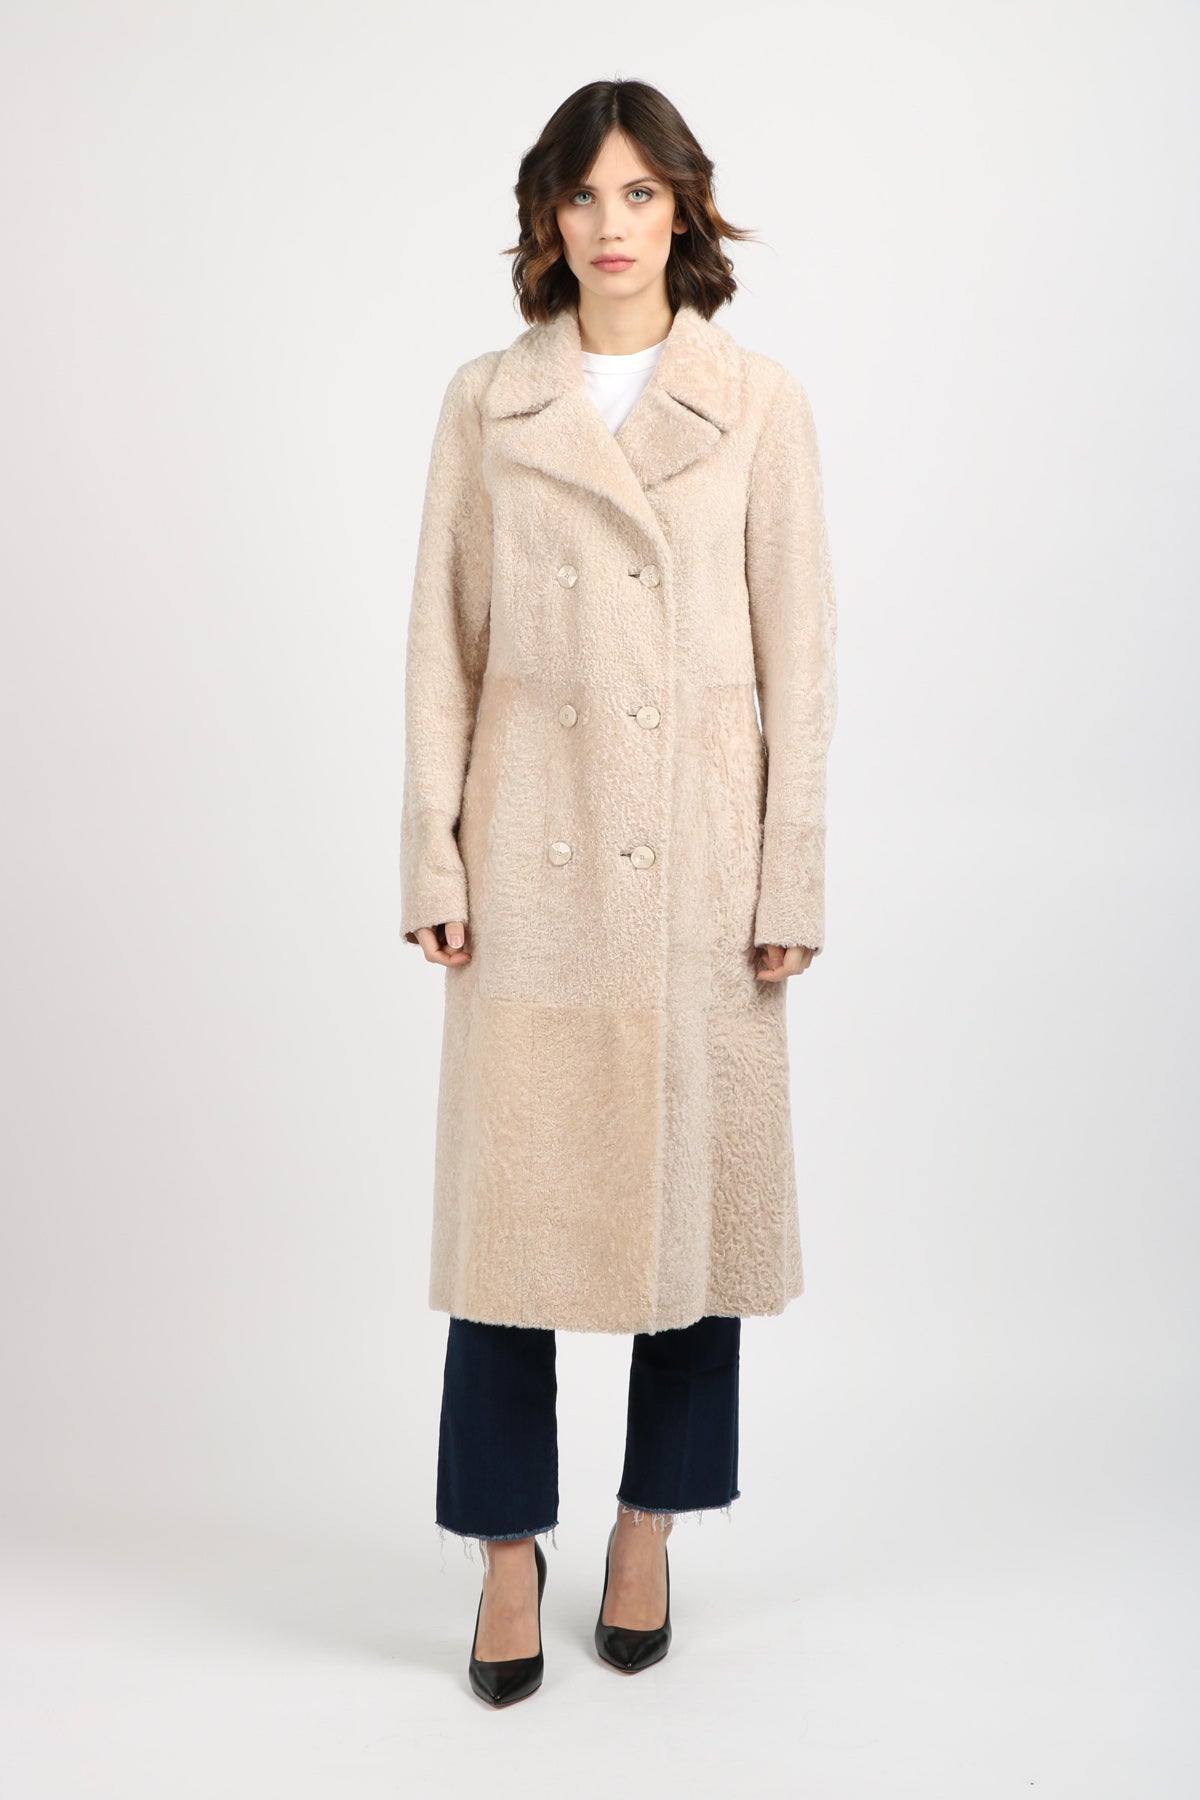 CAPPOTTO SHEARLING DOUBLE FACE IN MONTONE